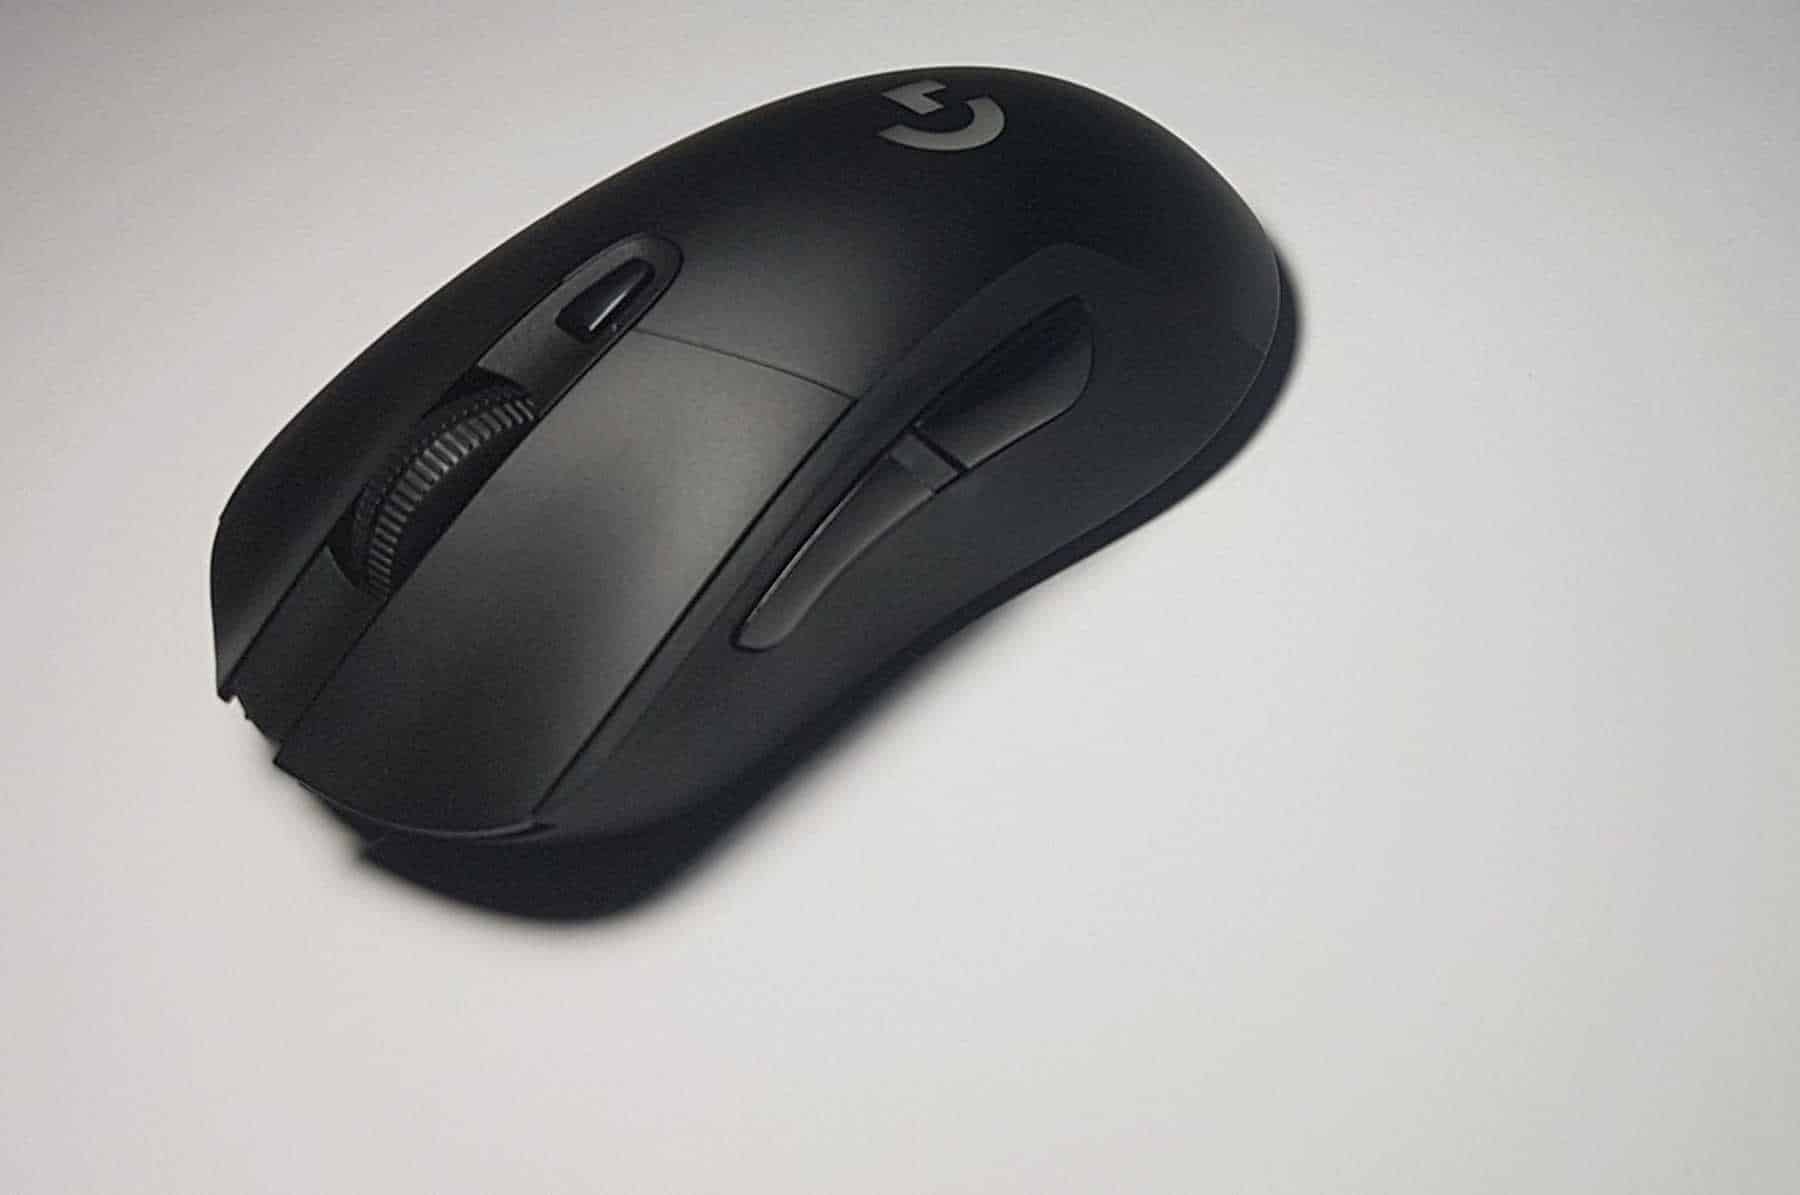 Logitech G403 Vs G703 Mouse Comparison Review Which Mouse Is Best For You